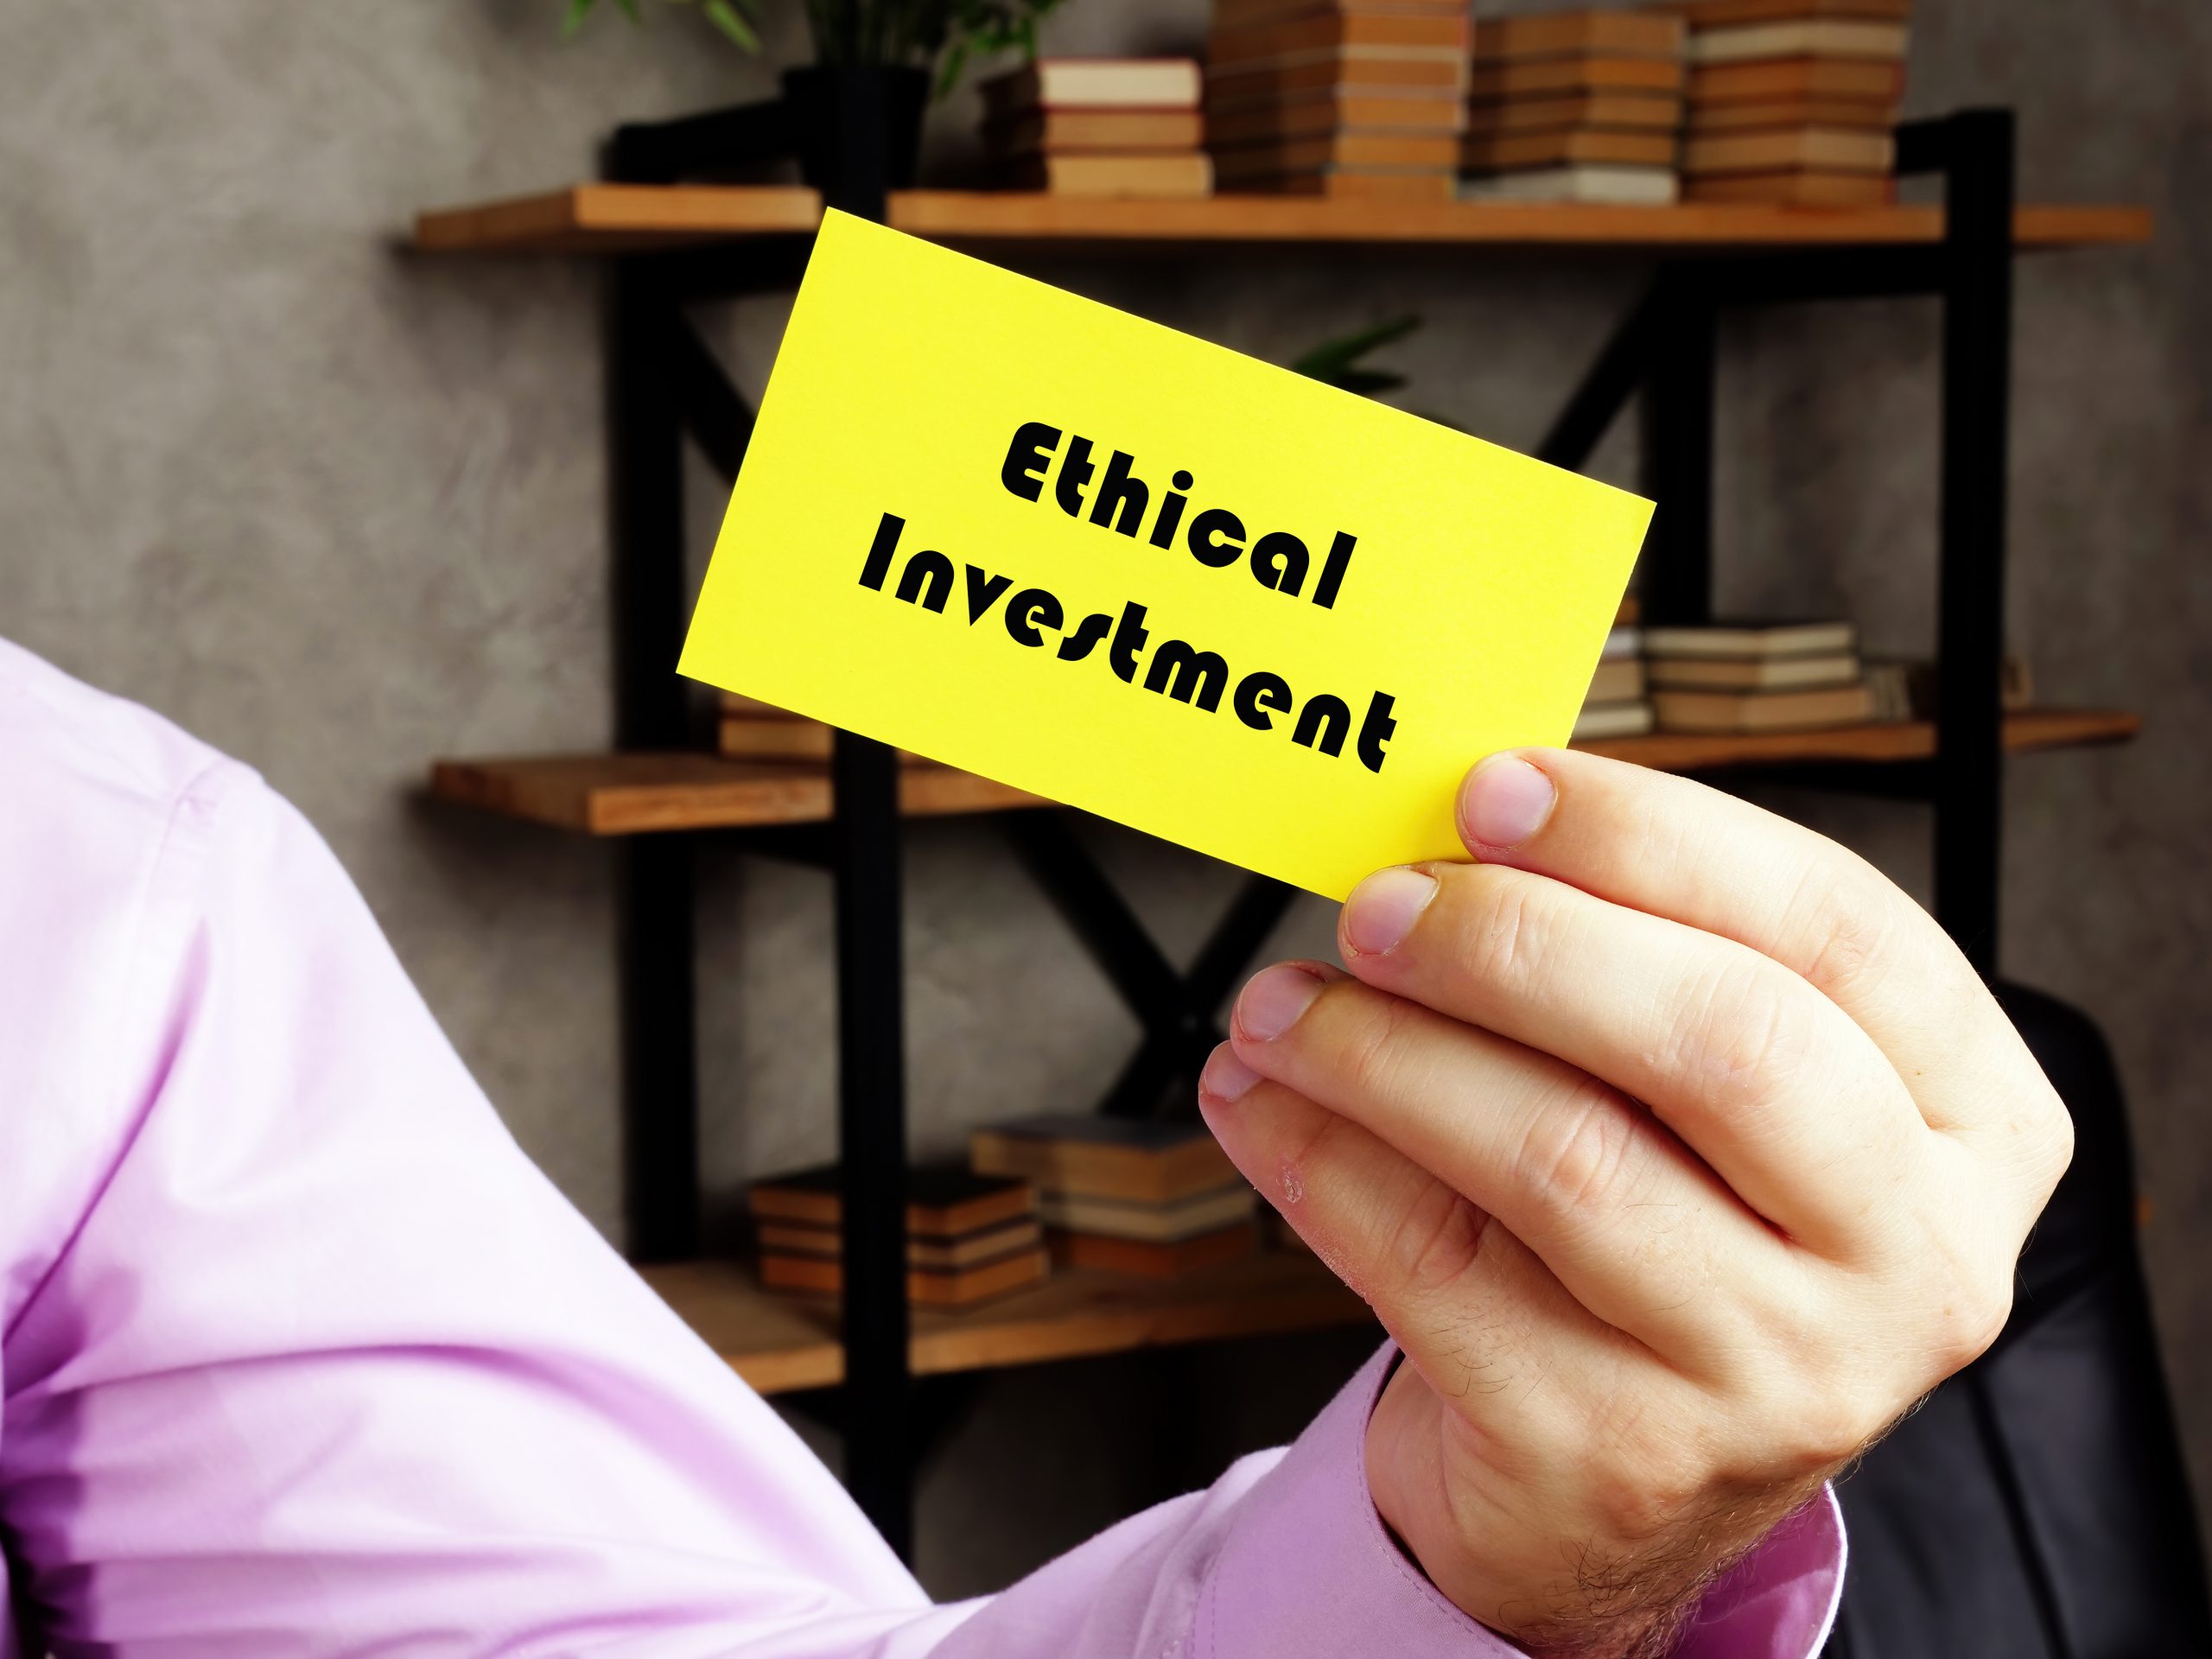 Business concept about Ethical Investment with phrase on the yelow business card.